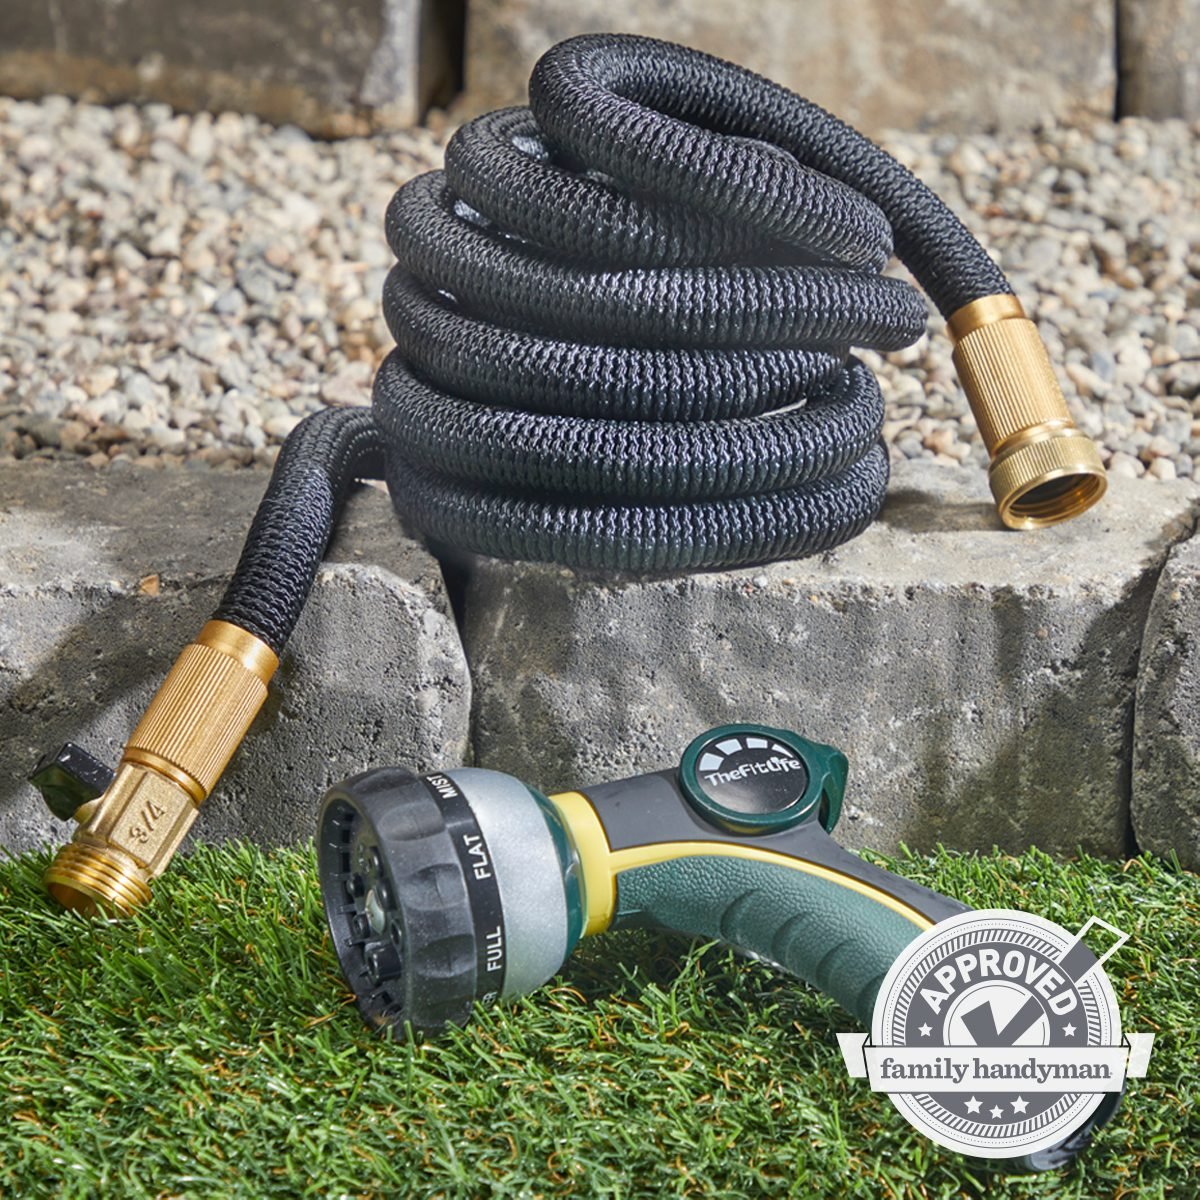 Fitlife Expandable Garden Hose Review: We Approve!